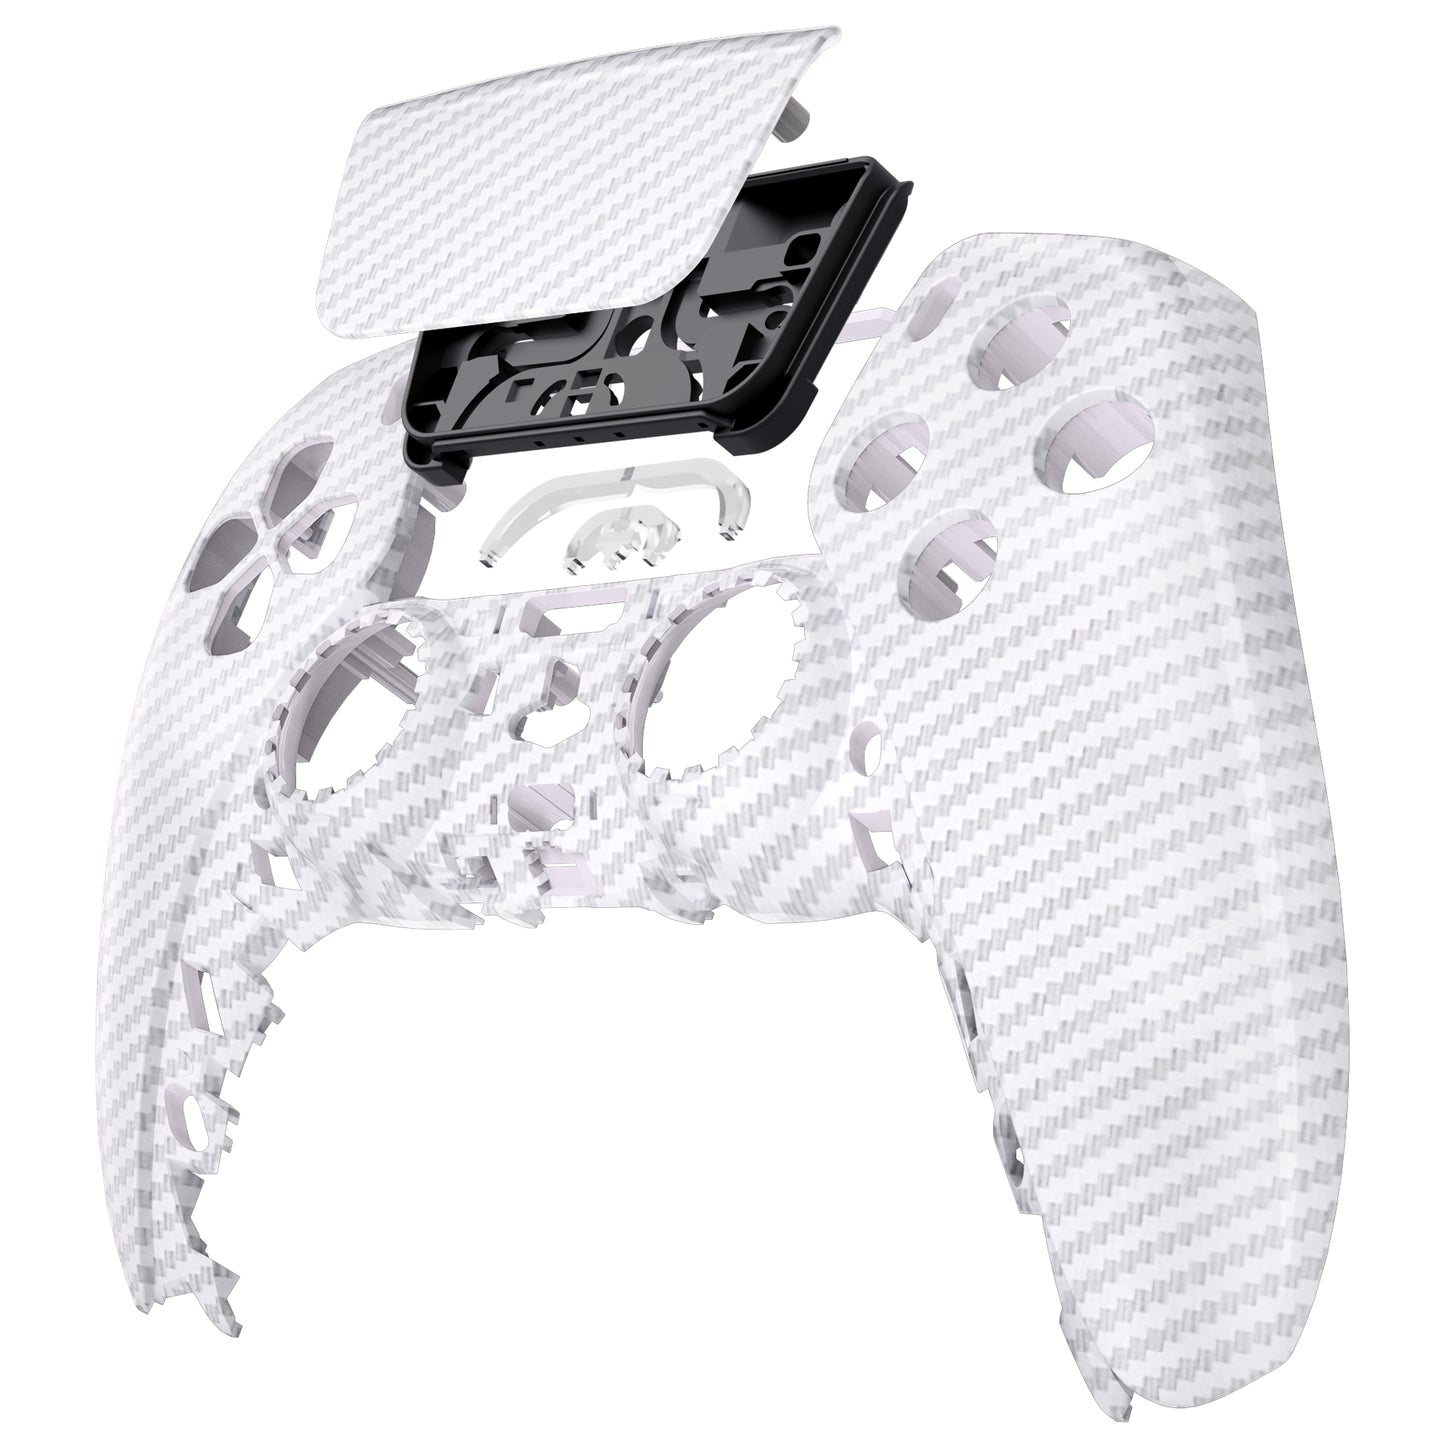 eXtremeRate Replacement Front Housing Shell with Touchpad Compatible with PS5 Controller BDM-010/020/030/040 - White Silver Carbon Fiber eXtremeRate